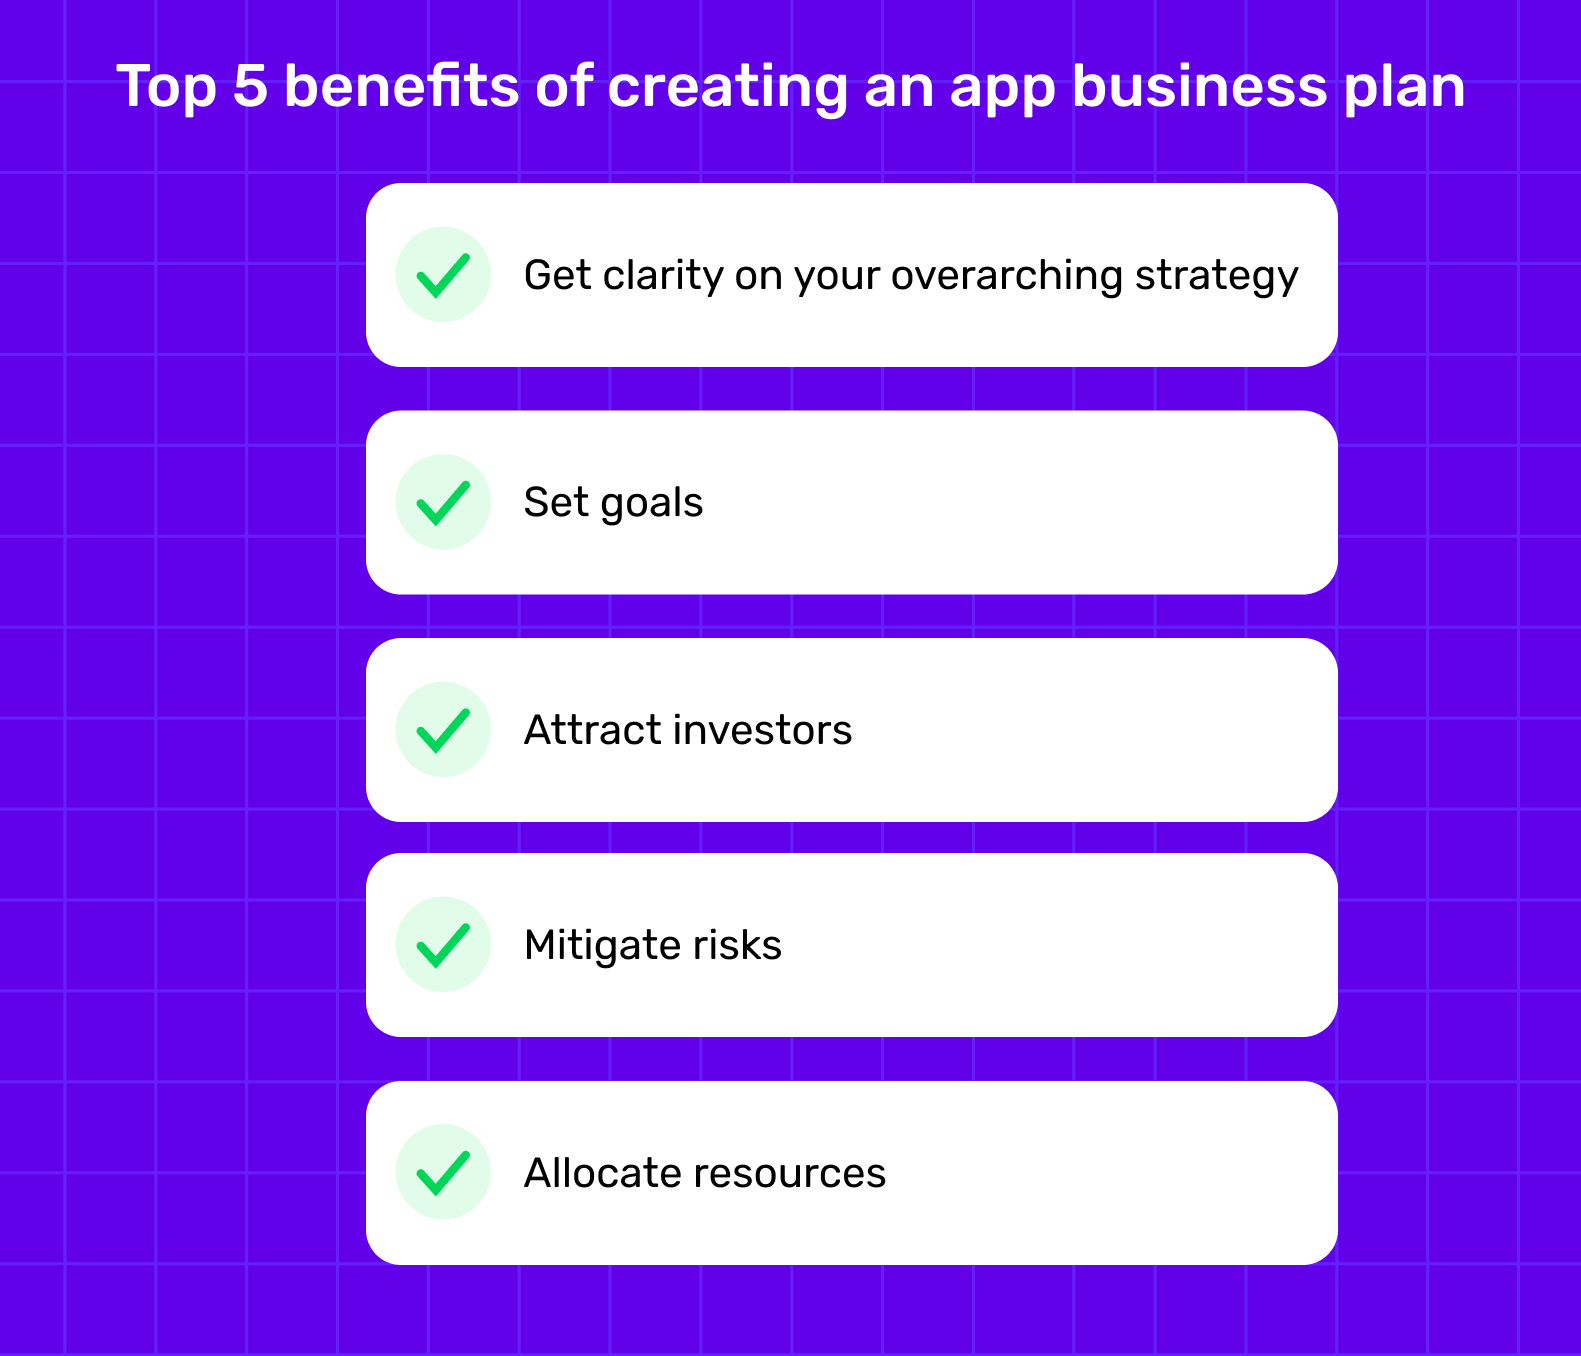 Top 5 benefits of creating an app business plan (Get clarity on your overarching strategy, Set goals, Mitigate risks, Allocate resources, Attract investors)